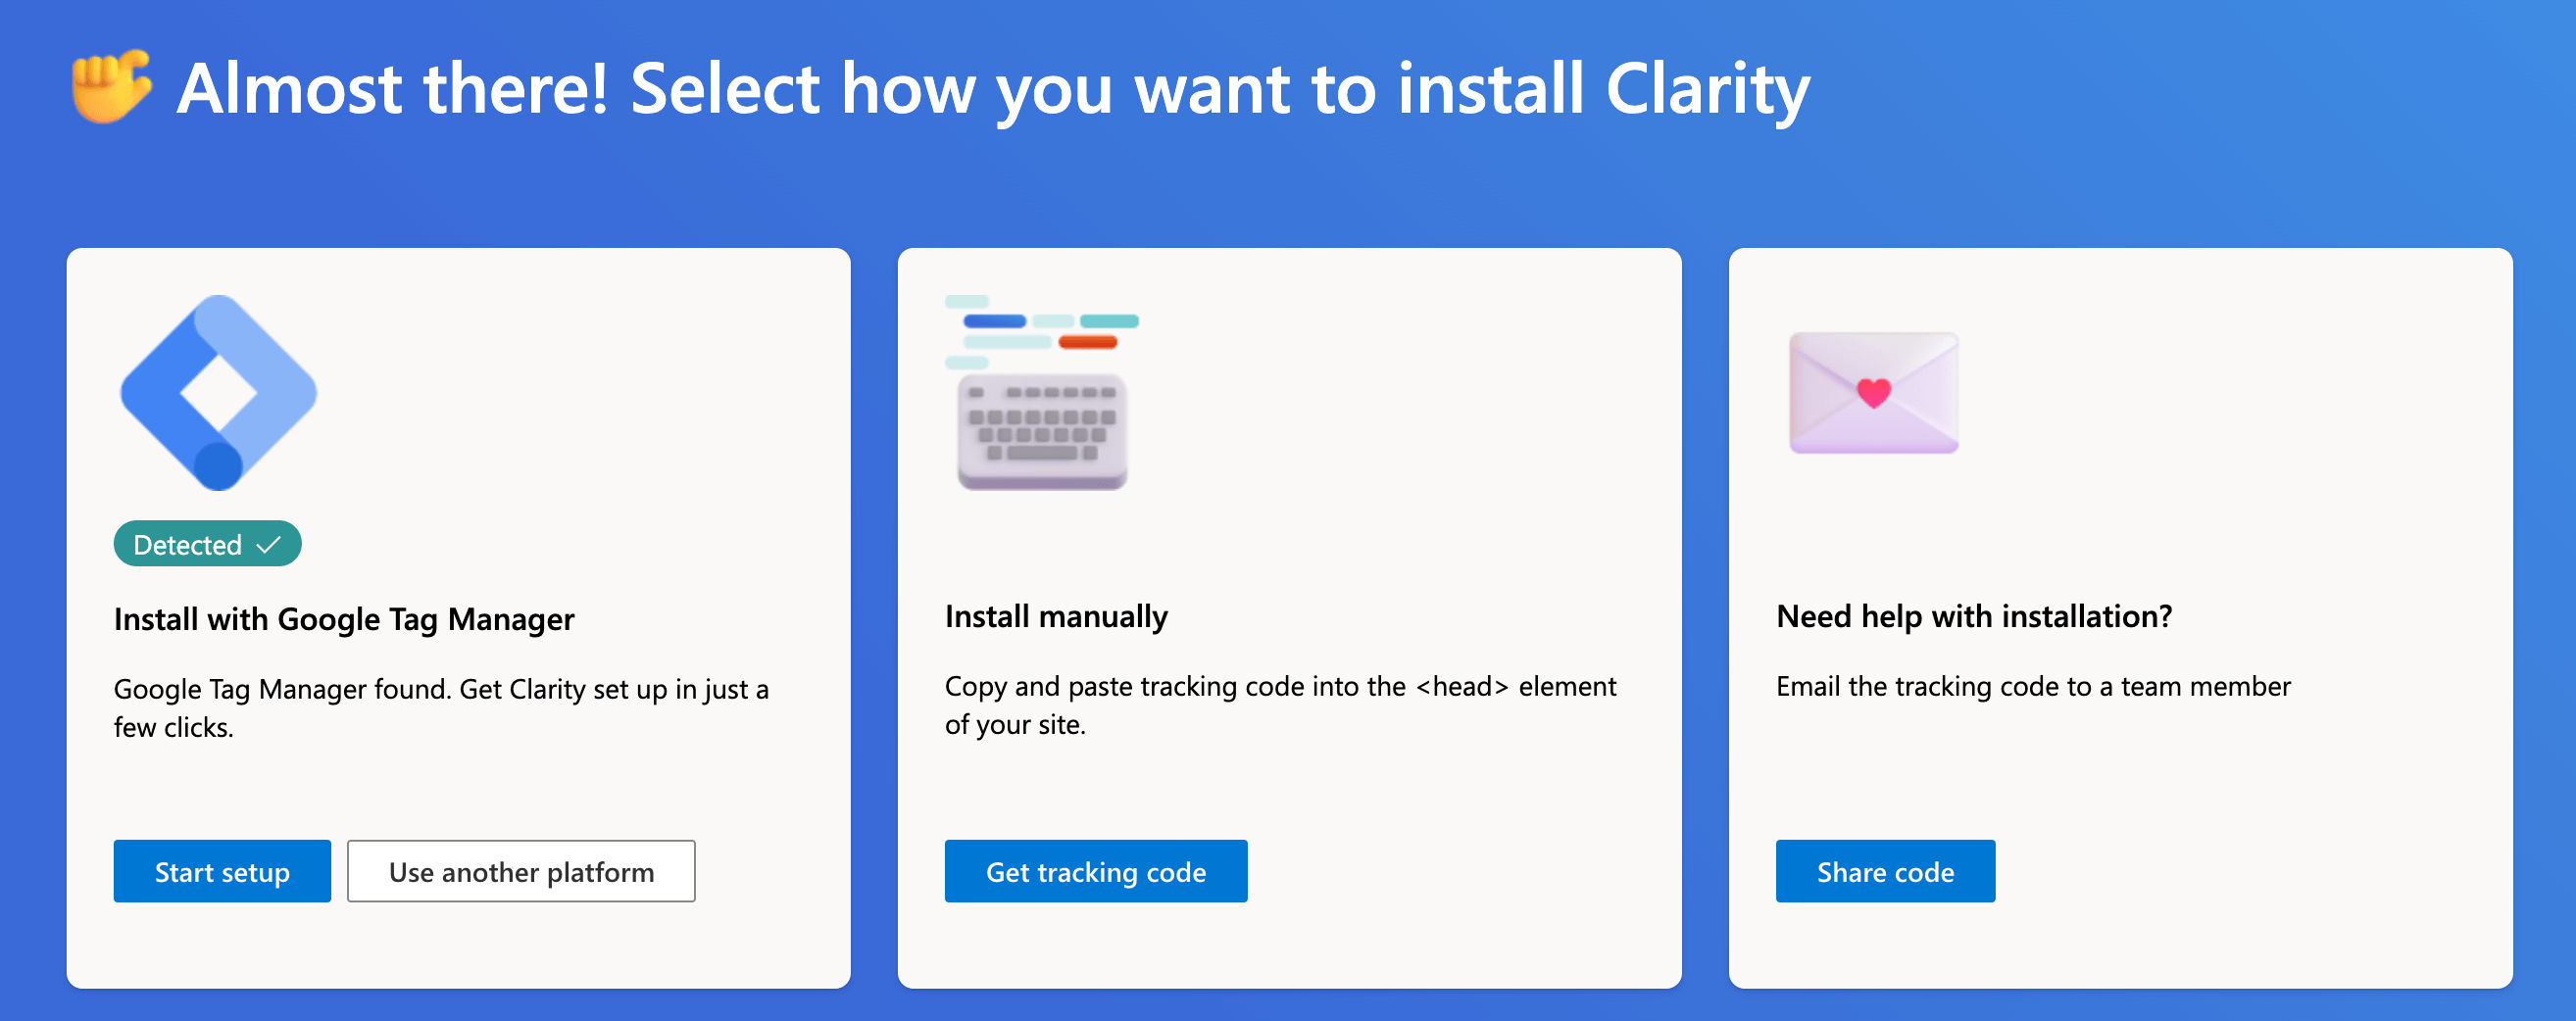 select how to install Microsoft clarity